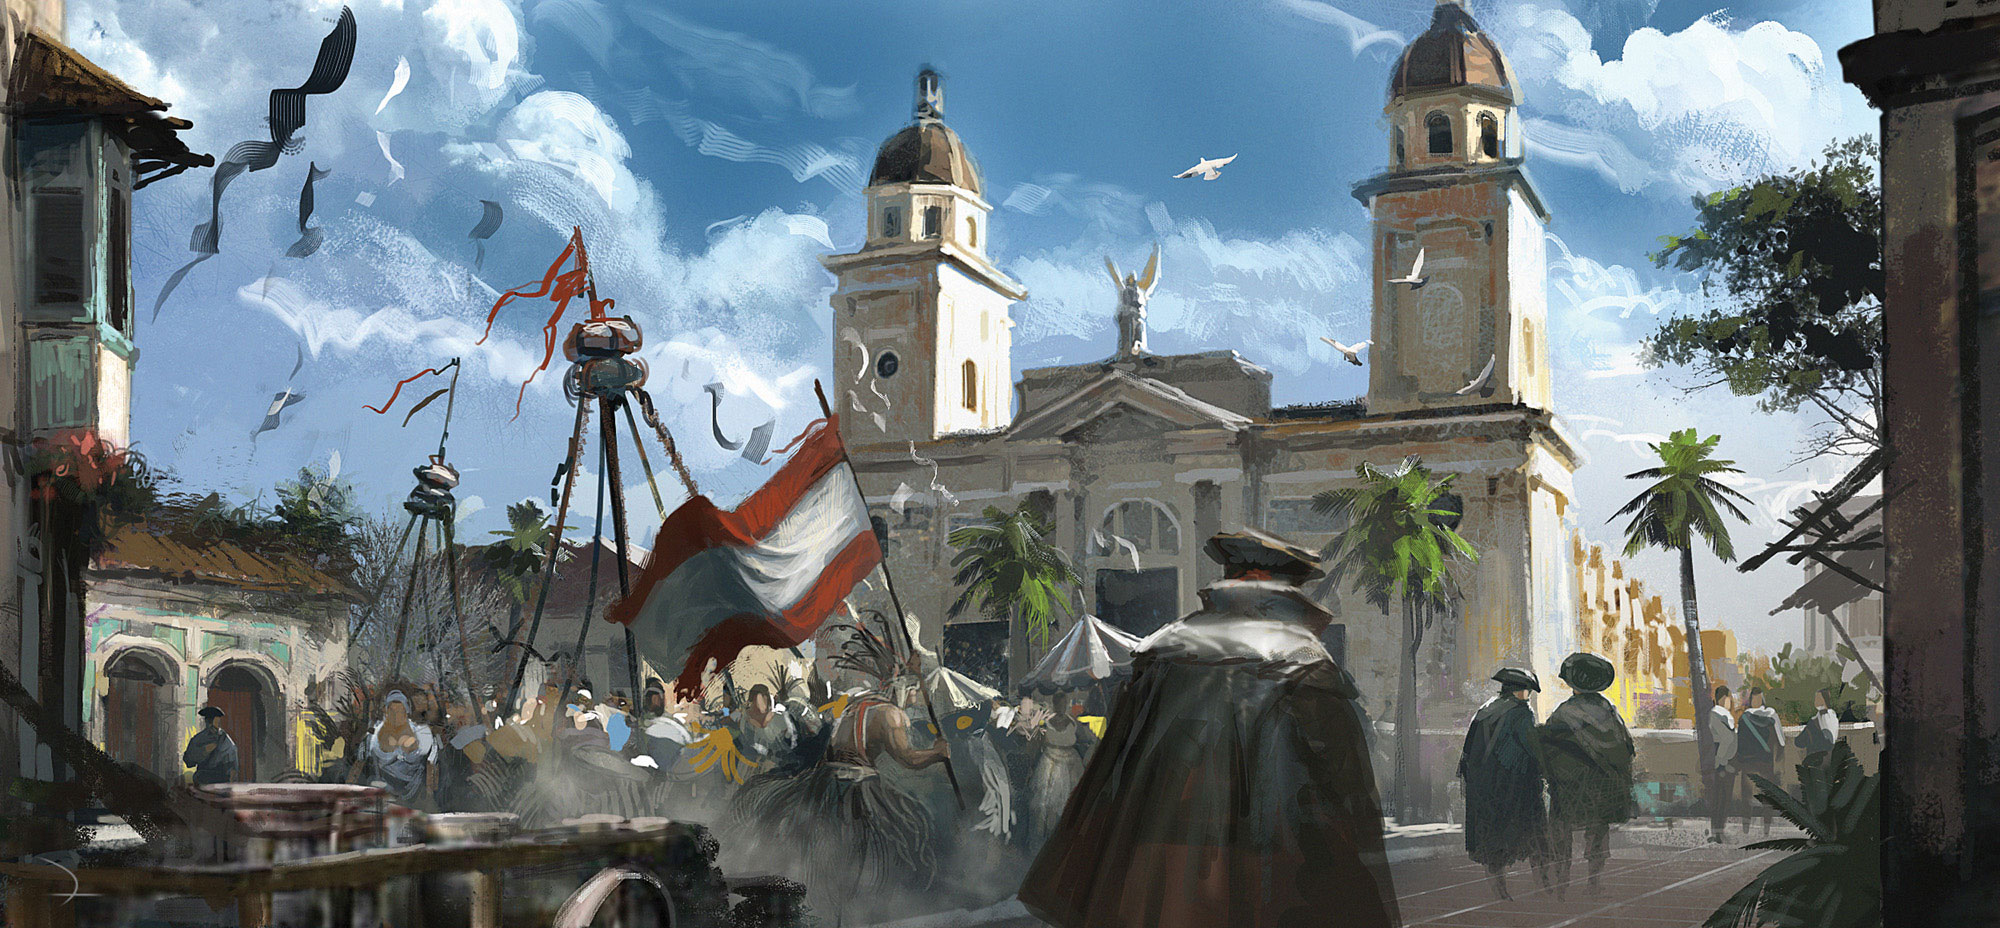 Fine Art: Assassin’s Creed IV Isn’t All Rum And Beaches. There’s Montreal Too.